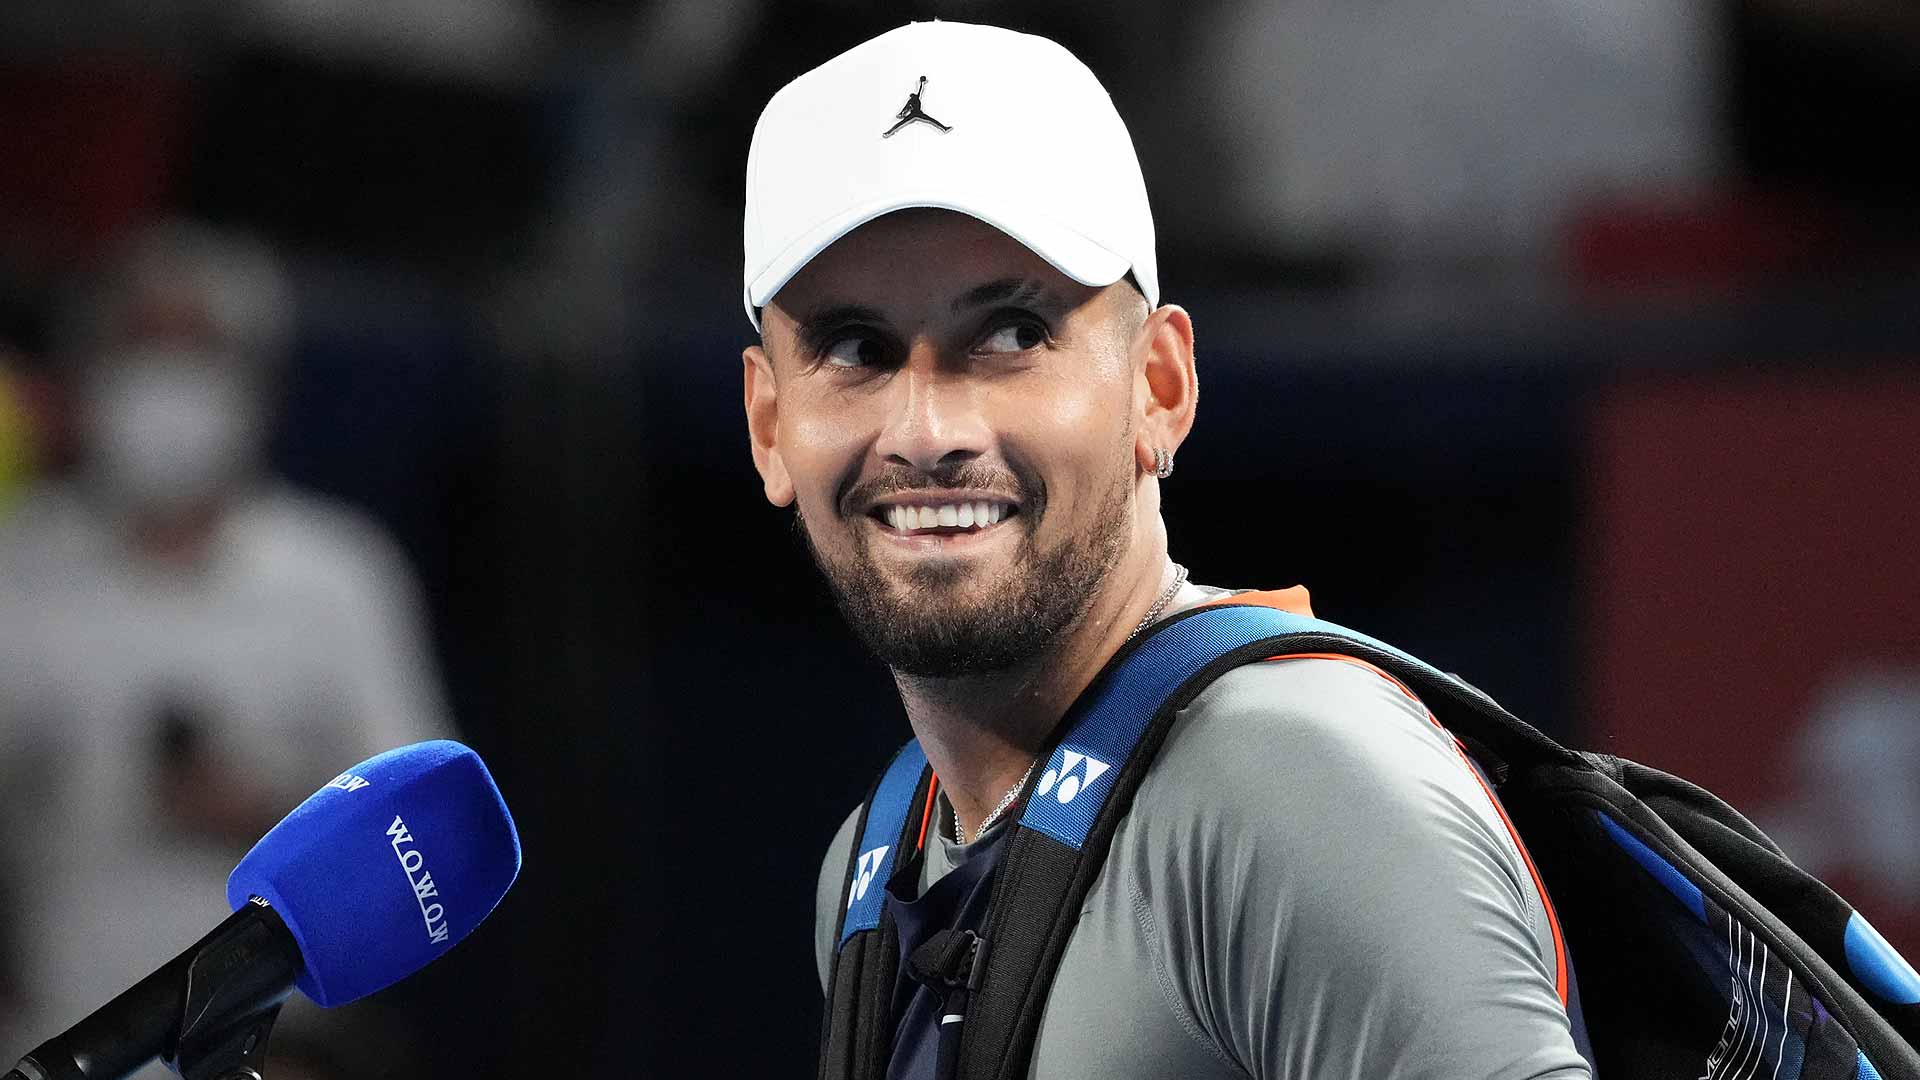 Nick Kyrgios lifted his maiden ATP 500 trophy in Tokyo in 2016.